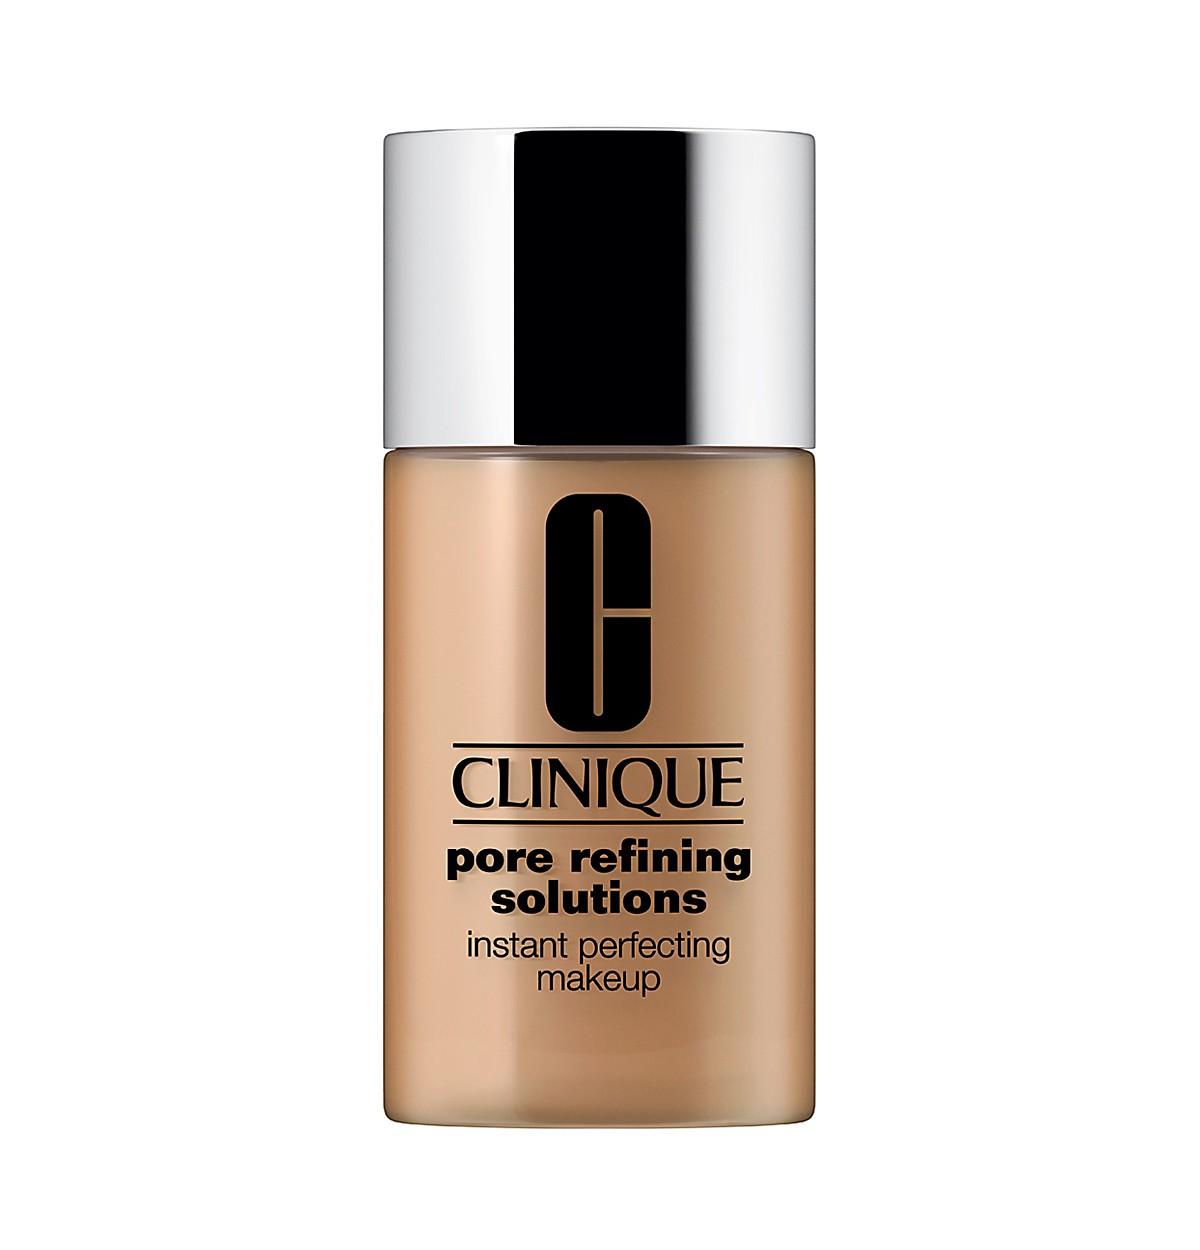 Foto Mujer Maquillaje Clinique Pore Refining Solutions Instant Perfecting foto 762769